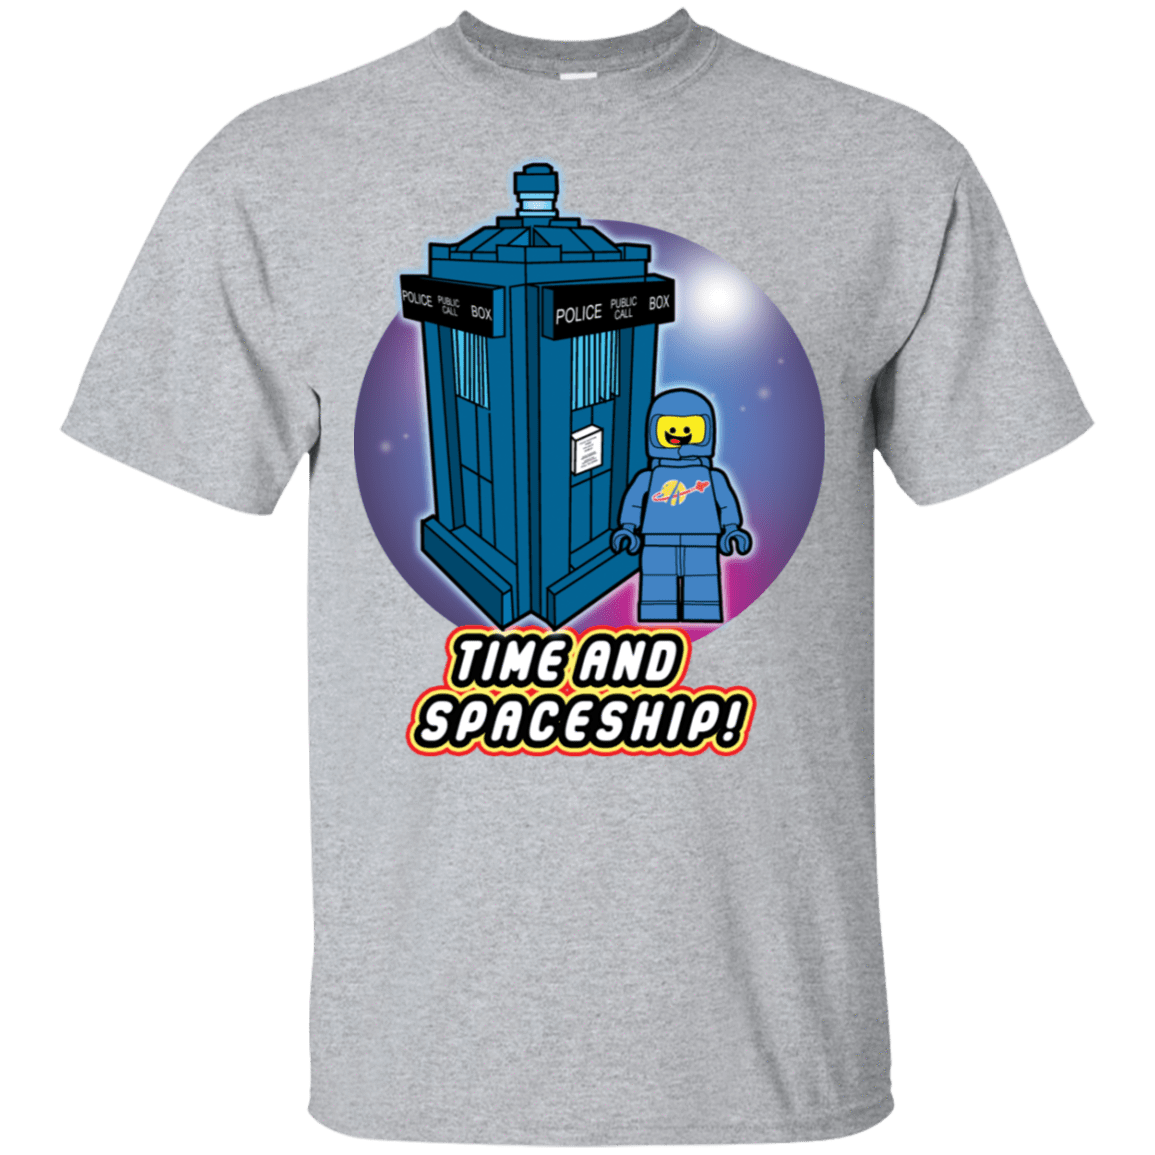 T-Shirts Sport Grey / S Time and Spaceship T-Shirt